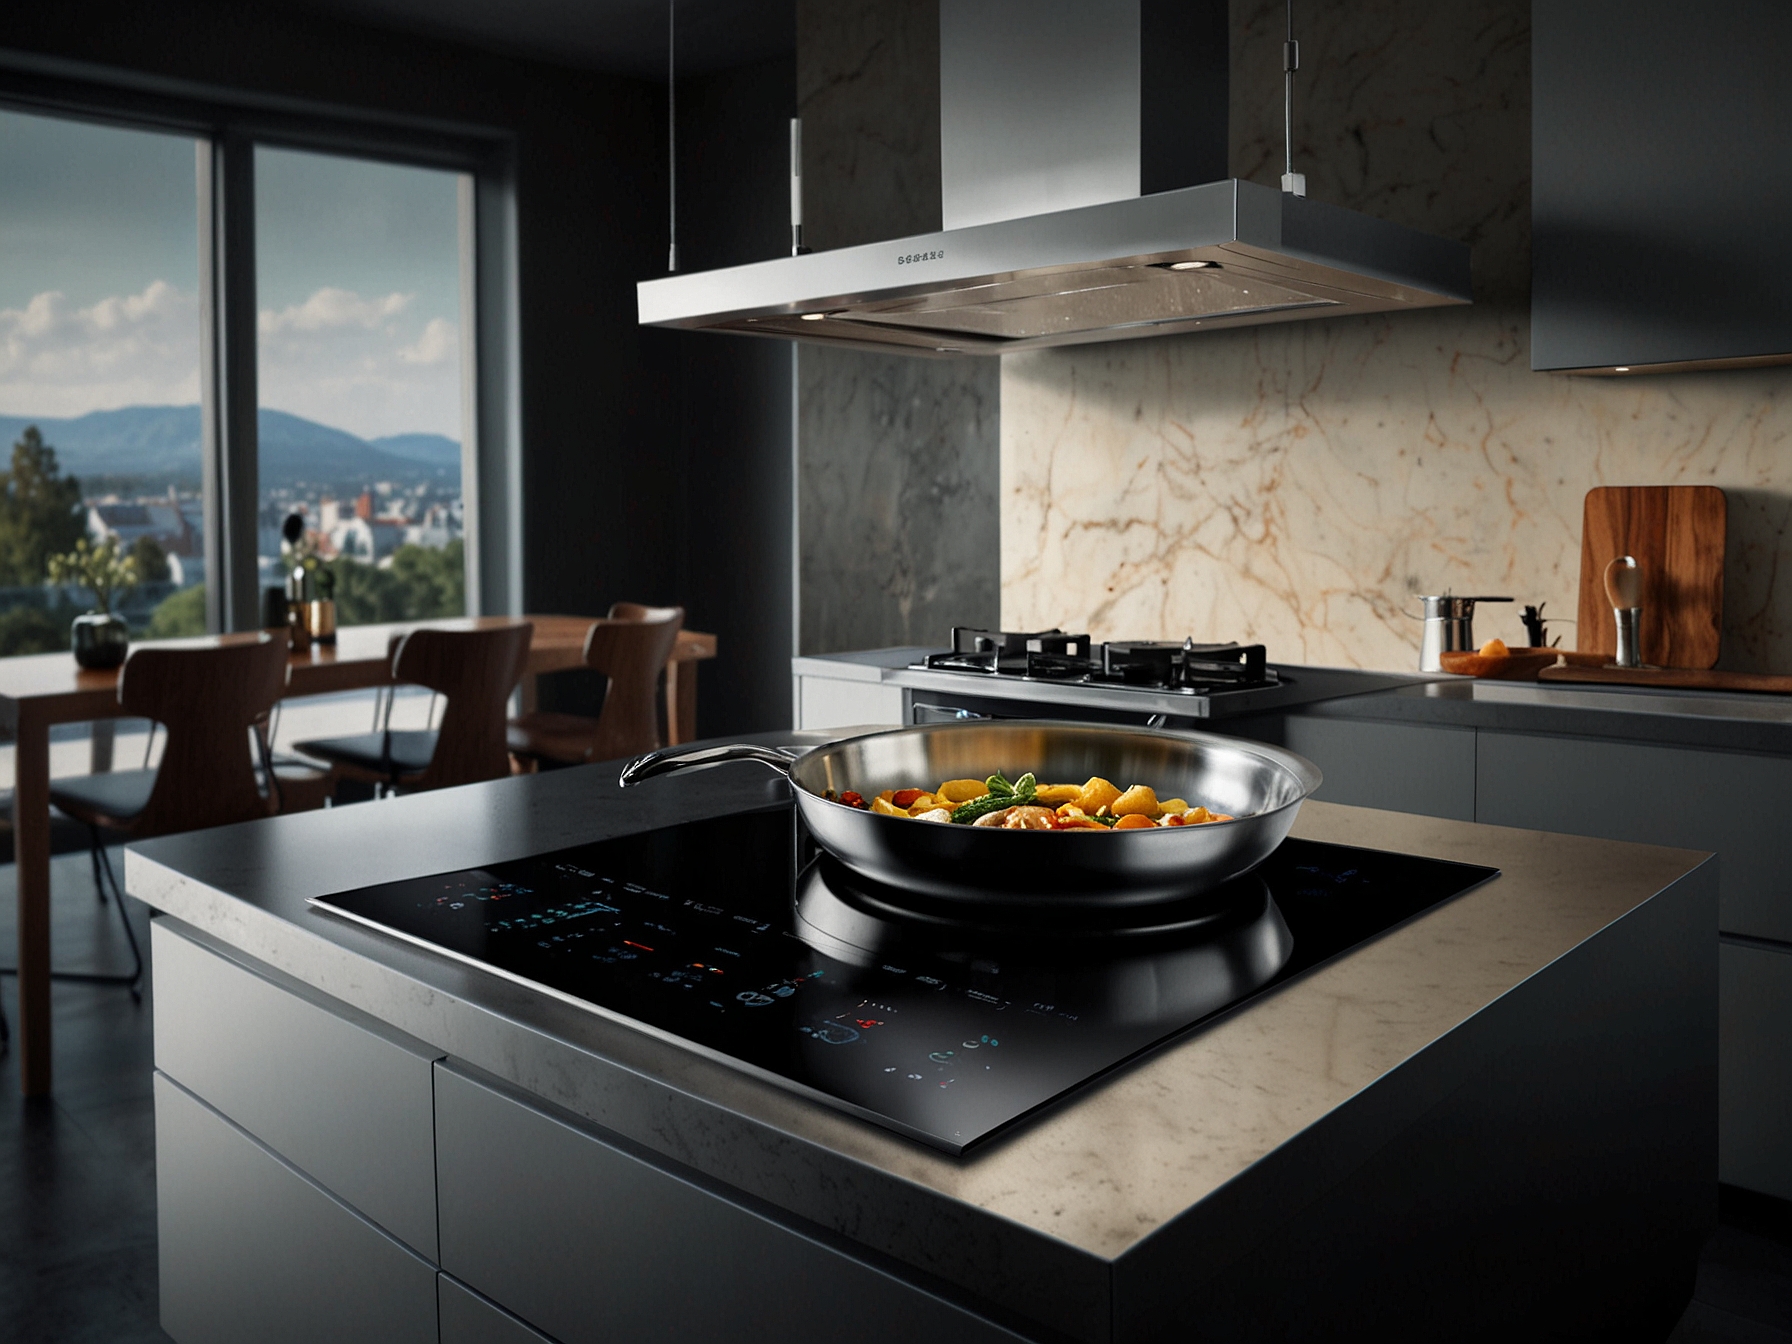 An elegant induction cooktop in a contemporary kitchen setting, featuring touch controls, cool-to-touch surface, and energy-efficient cooking, emphasizing its safety and advanced technology.